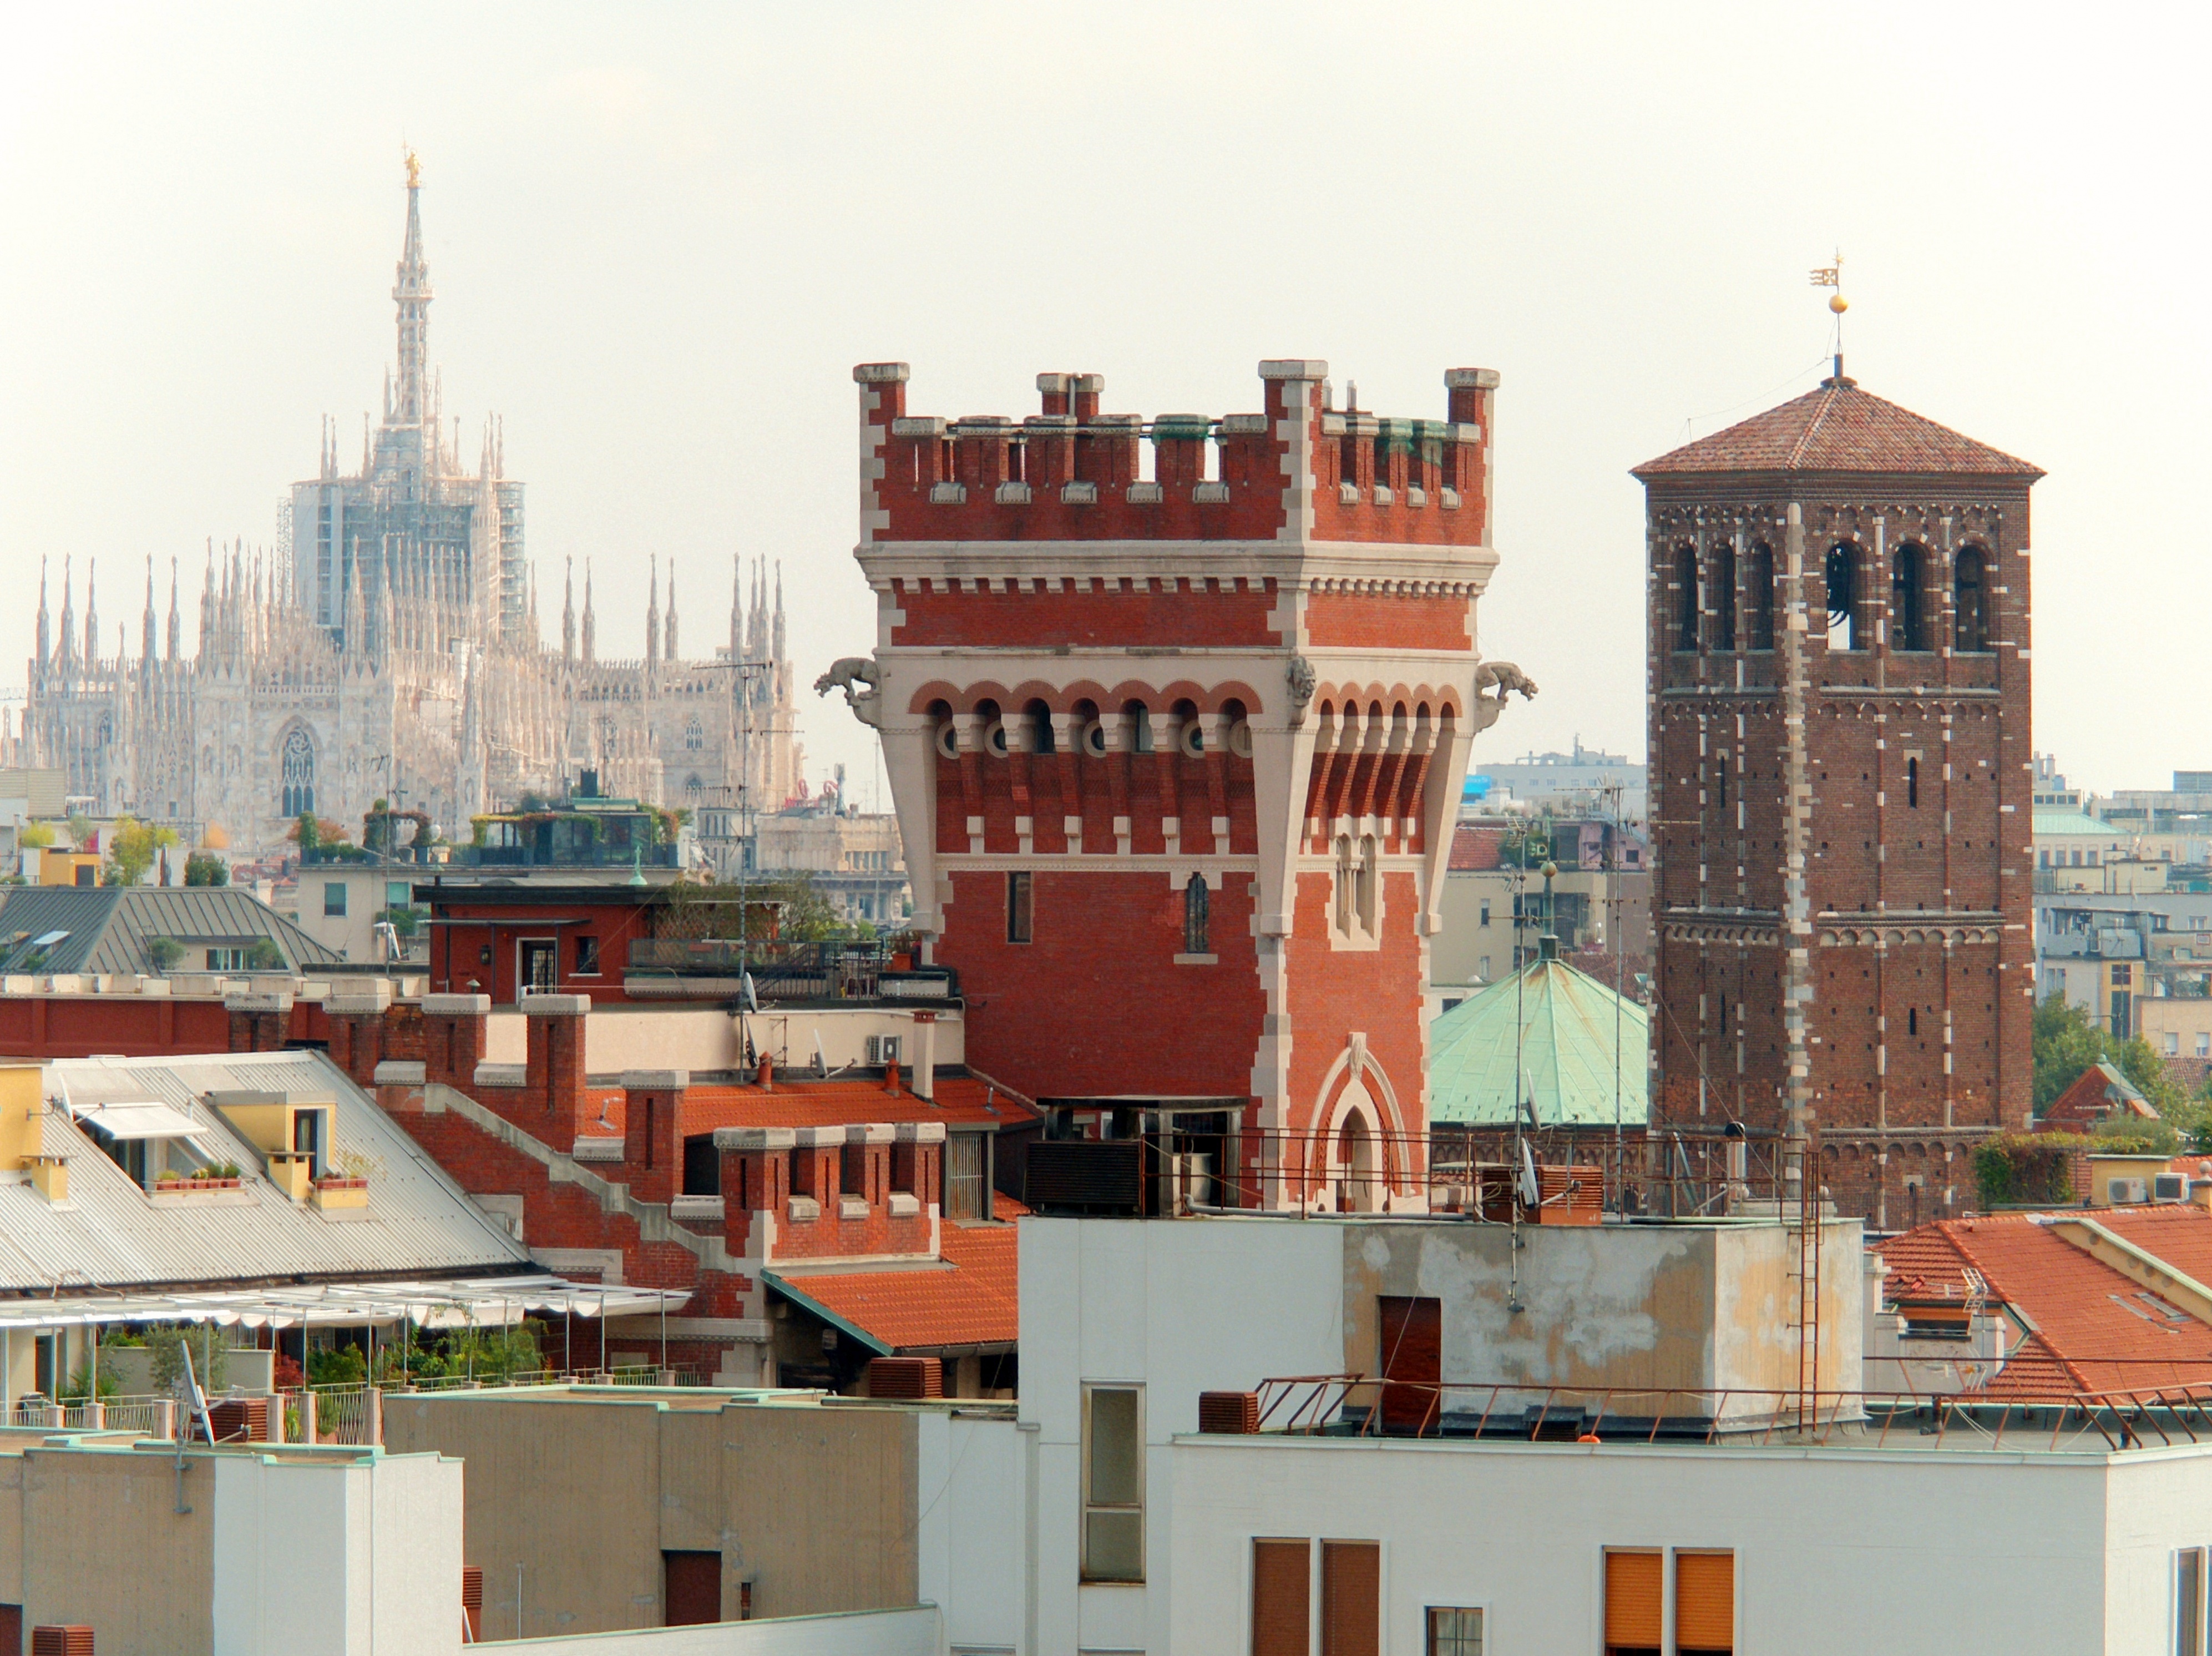 Milan (Italy): Duomo, tower of the Cova Castle and main bell tower of the Basilica of Sant'Ambrogio - Milan (Italy)